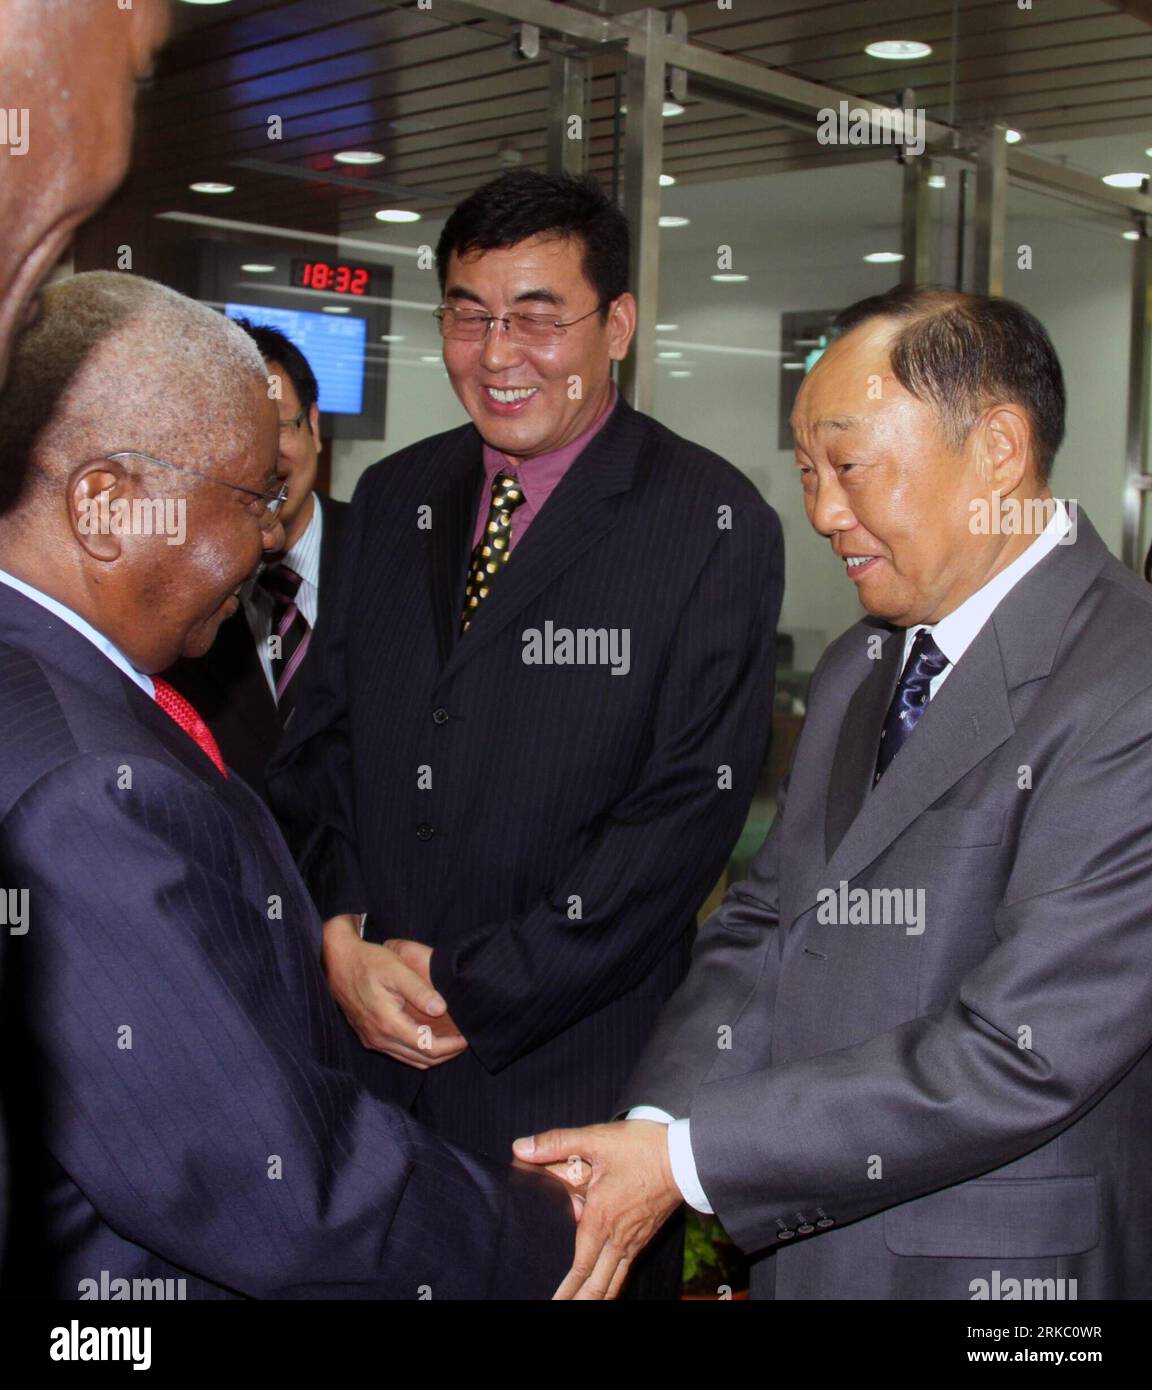 Bildnummer: 54636086  Datum: 12.11.2010  Copyright: imago/Xinhua (101113) -- MAPUTO, Nov. 13, 2010 (Xinhua) -- Mozambican President Armando Guebuza (L) greets Chinese representatives during the launching ceremony for a new terminal of Maputo International Airport in Maputo, Mozambique, Nov. 12, 2010. The new terminal, built with Chinese aid, was put into use on Friday. (Xinhua/Liu Dalong) (zx) MOZAMBIQUE-MAPUTO-AIRPORT-TERMINAL-CHINA PUBLICATIONxNOTxINxCHN Politik People kbdig xub 2010 quadrat     Bildnummer 54636086 Date 12 11 2010 Copyright Imago XINHUA  Maputo Nov 13 2010 XINHUA Mozambican Stock Photo